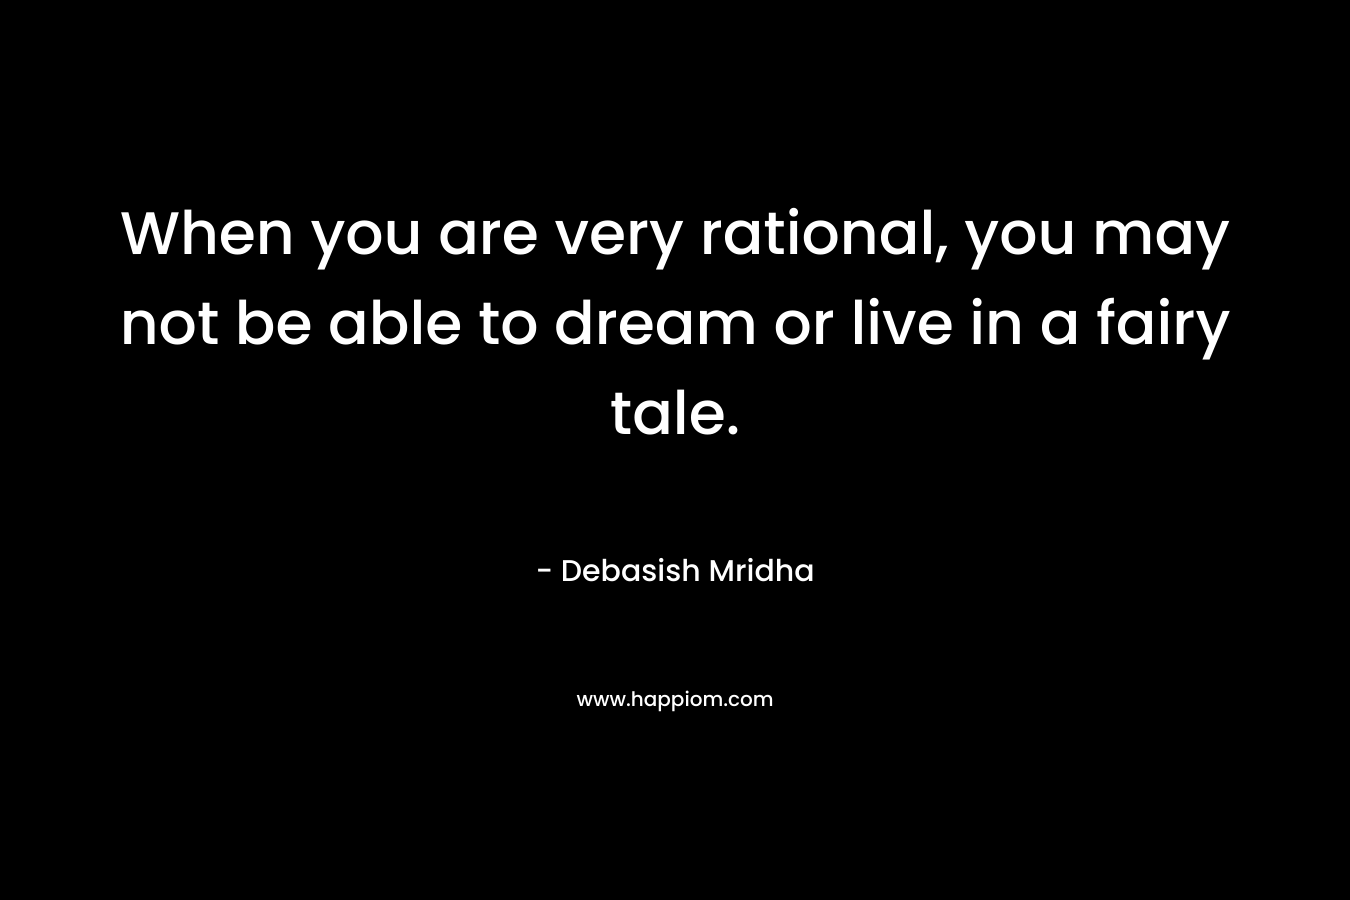 When you are very rational, you may not be able to dream or live in a fairy tale.